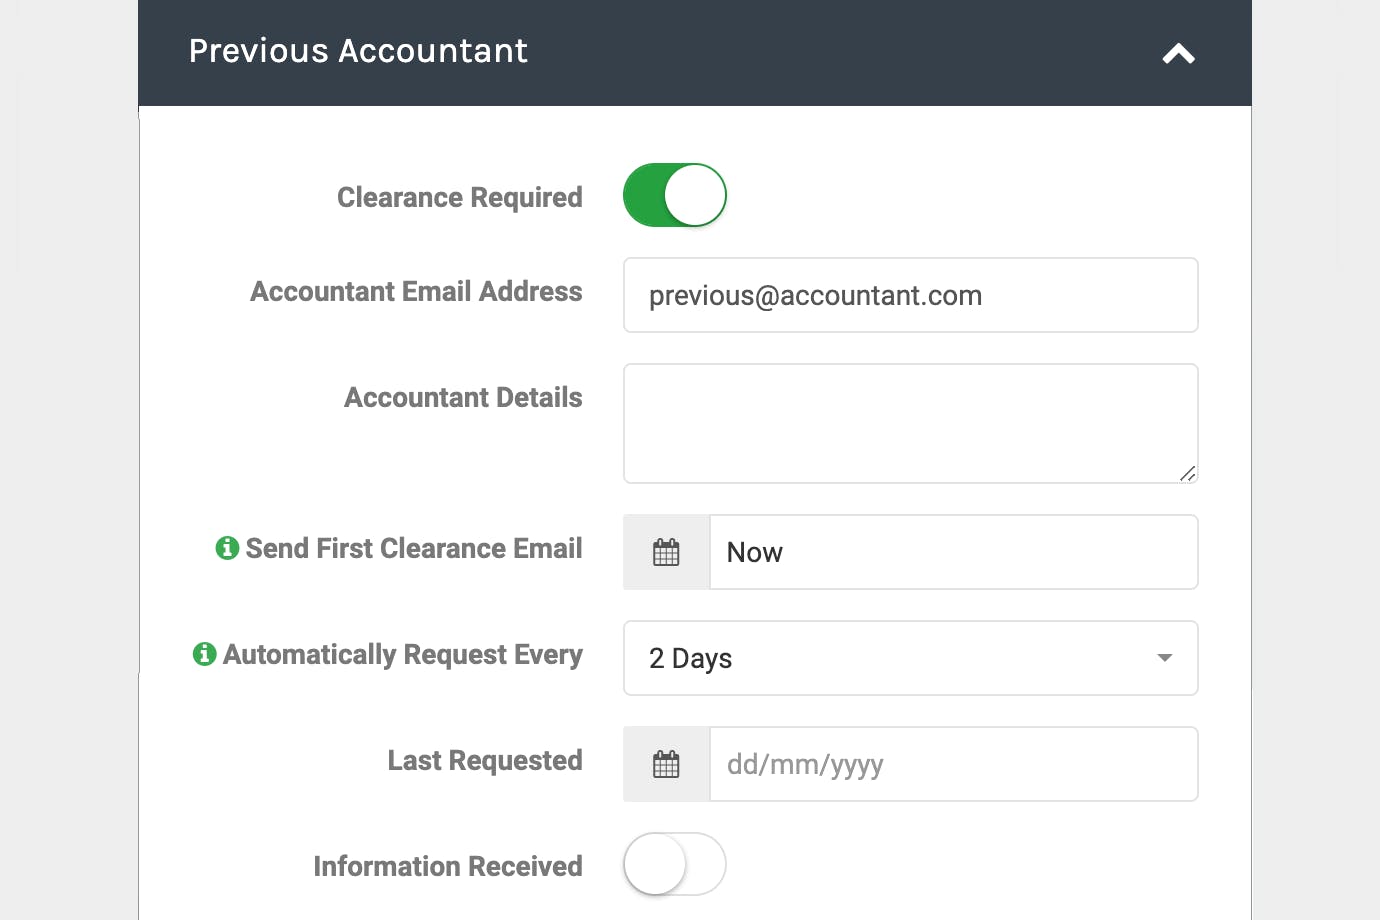 Automated client Onboarding for accountancy practice brightmanager accountancymanager